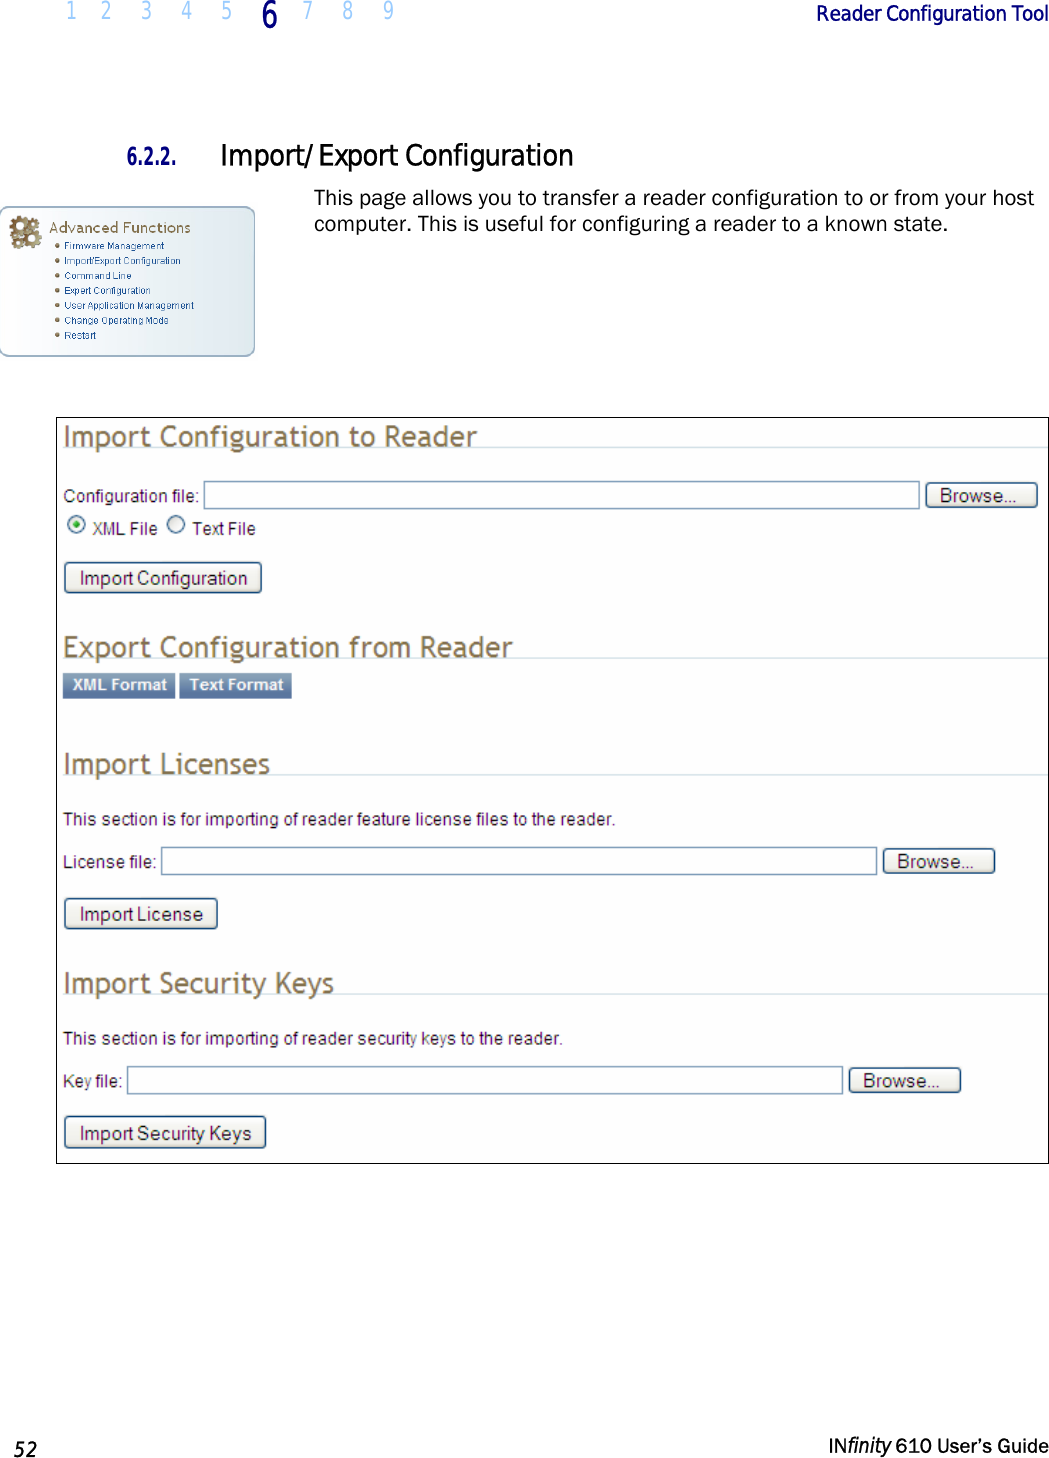  1 2  3  4 5  6  7 8 9        Reader Configuration Tool   52   INfinity 610 User’s Guide  6.2.2. Import/Export Configuration This page allows you to transfer a reader configuration to or from your host computer. This is useful for configuring a reader to a known state.      